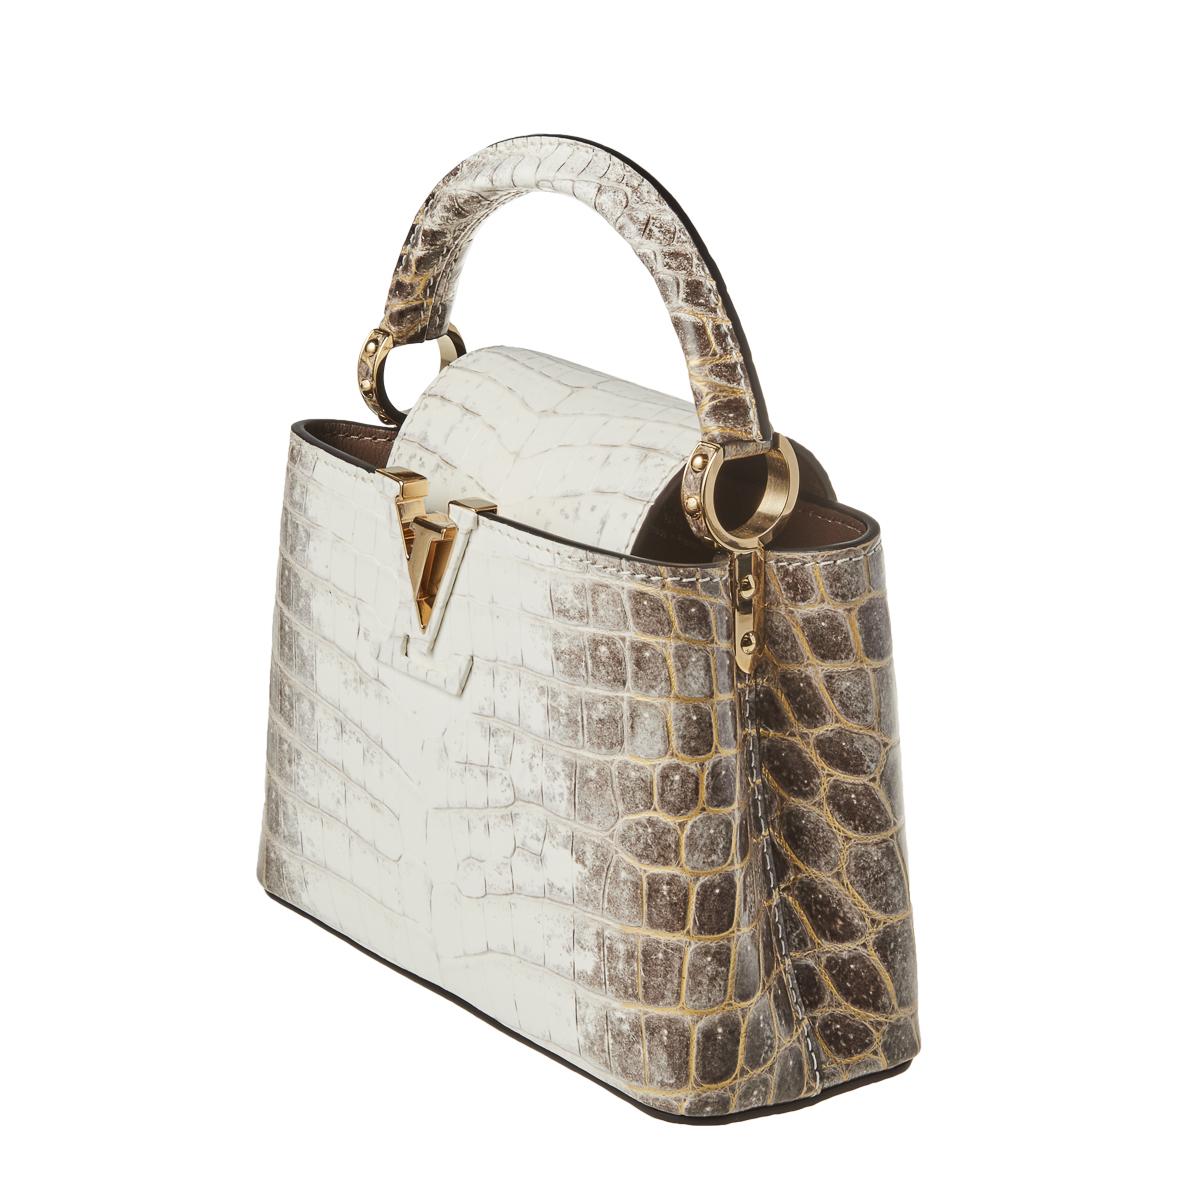 Webb's - The Louis Vuitton Exotic Leathers Collection includes lizard,  python, crocodile and ostrich leathers. Of these, crocodile leather is  regarded as the most precious and exclusive of the collection. At present